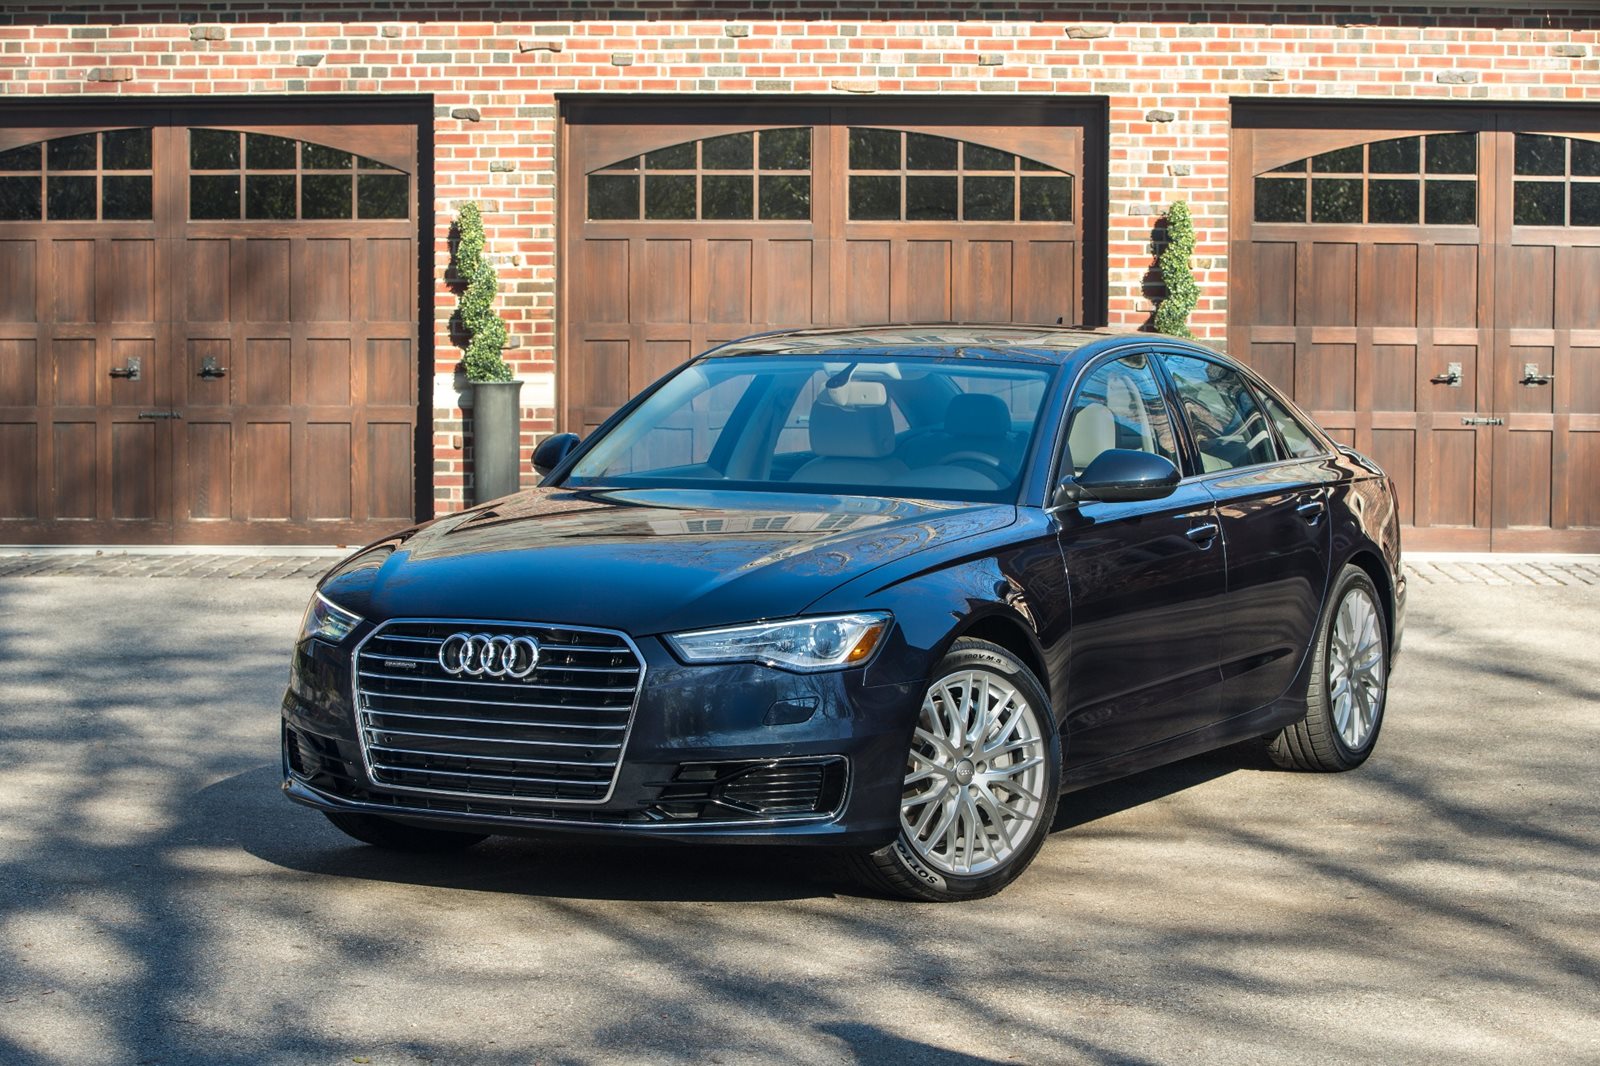 2018 Audi A6 Review, Pricing, and Specs